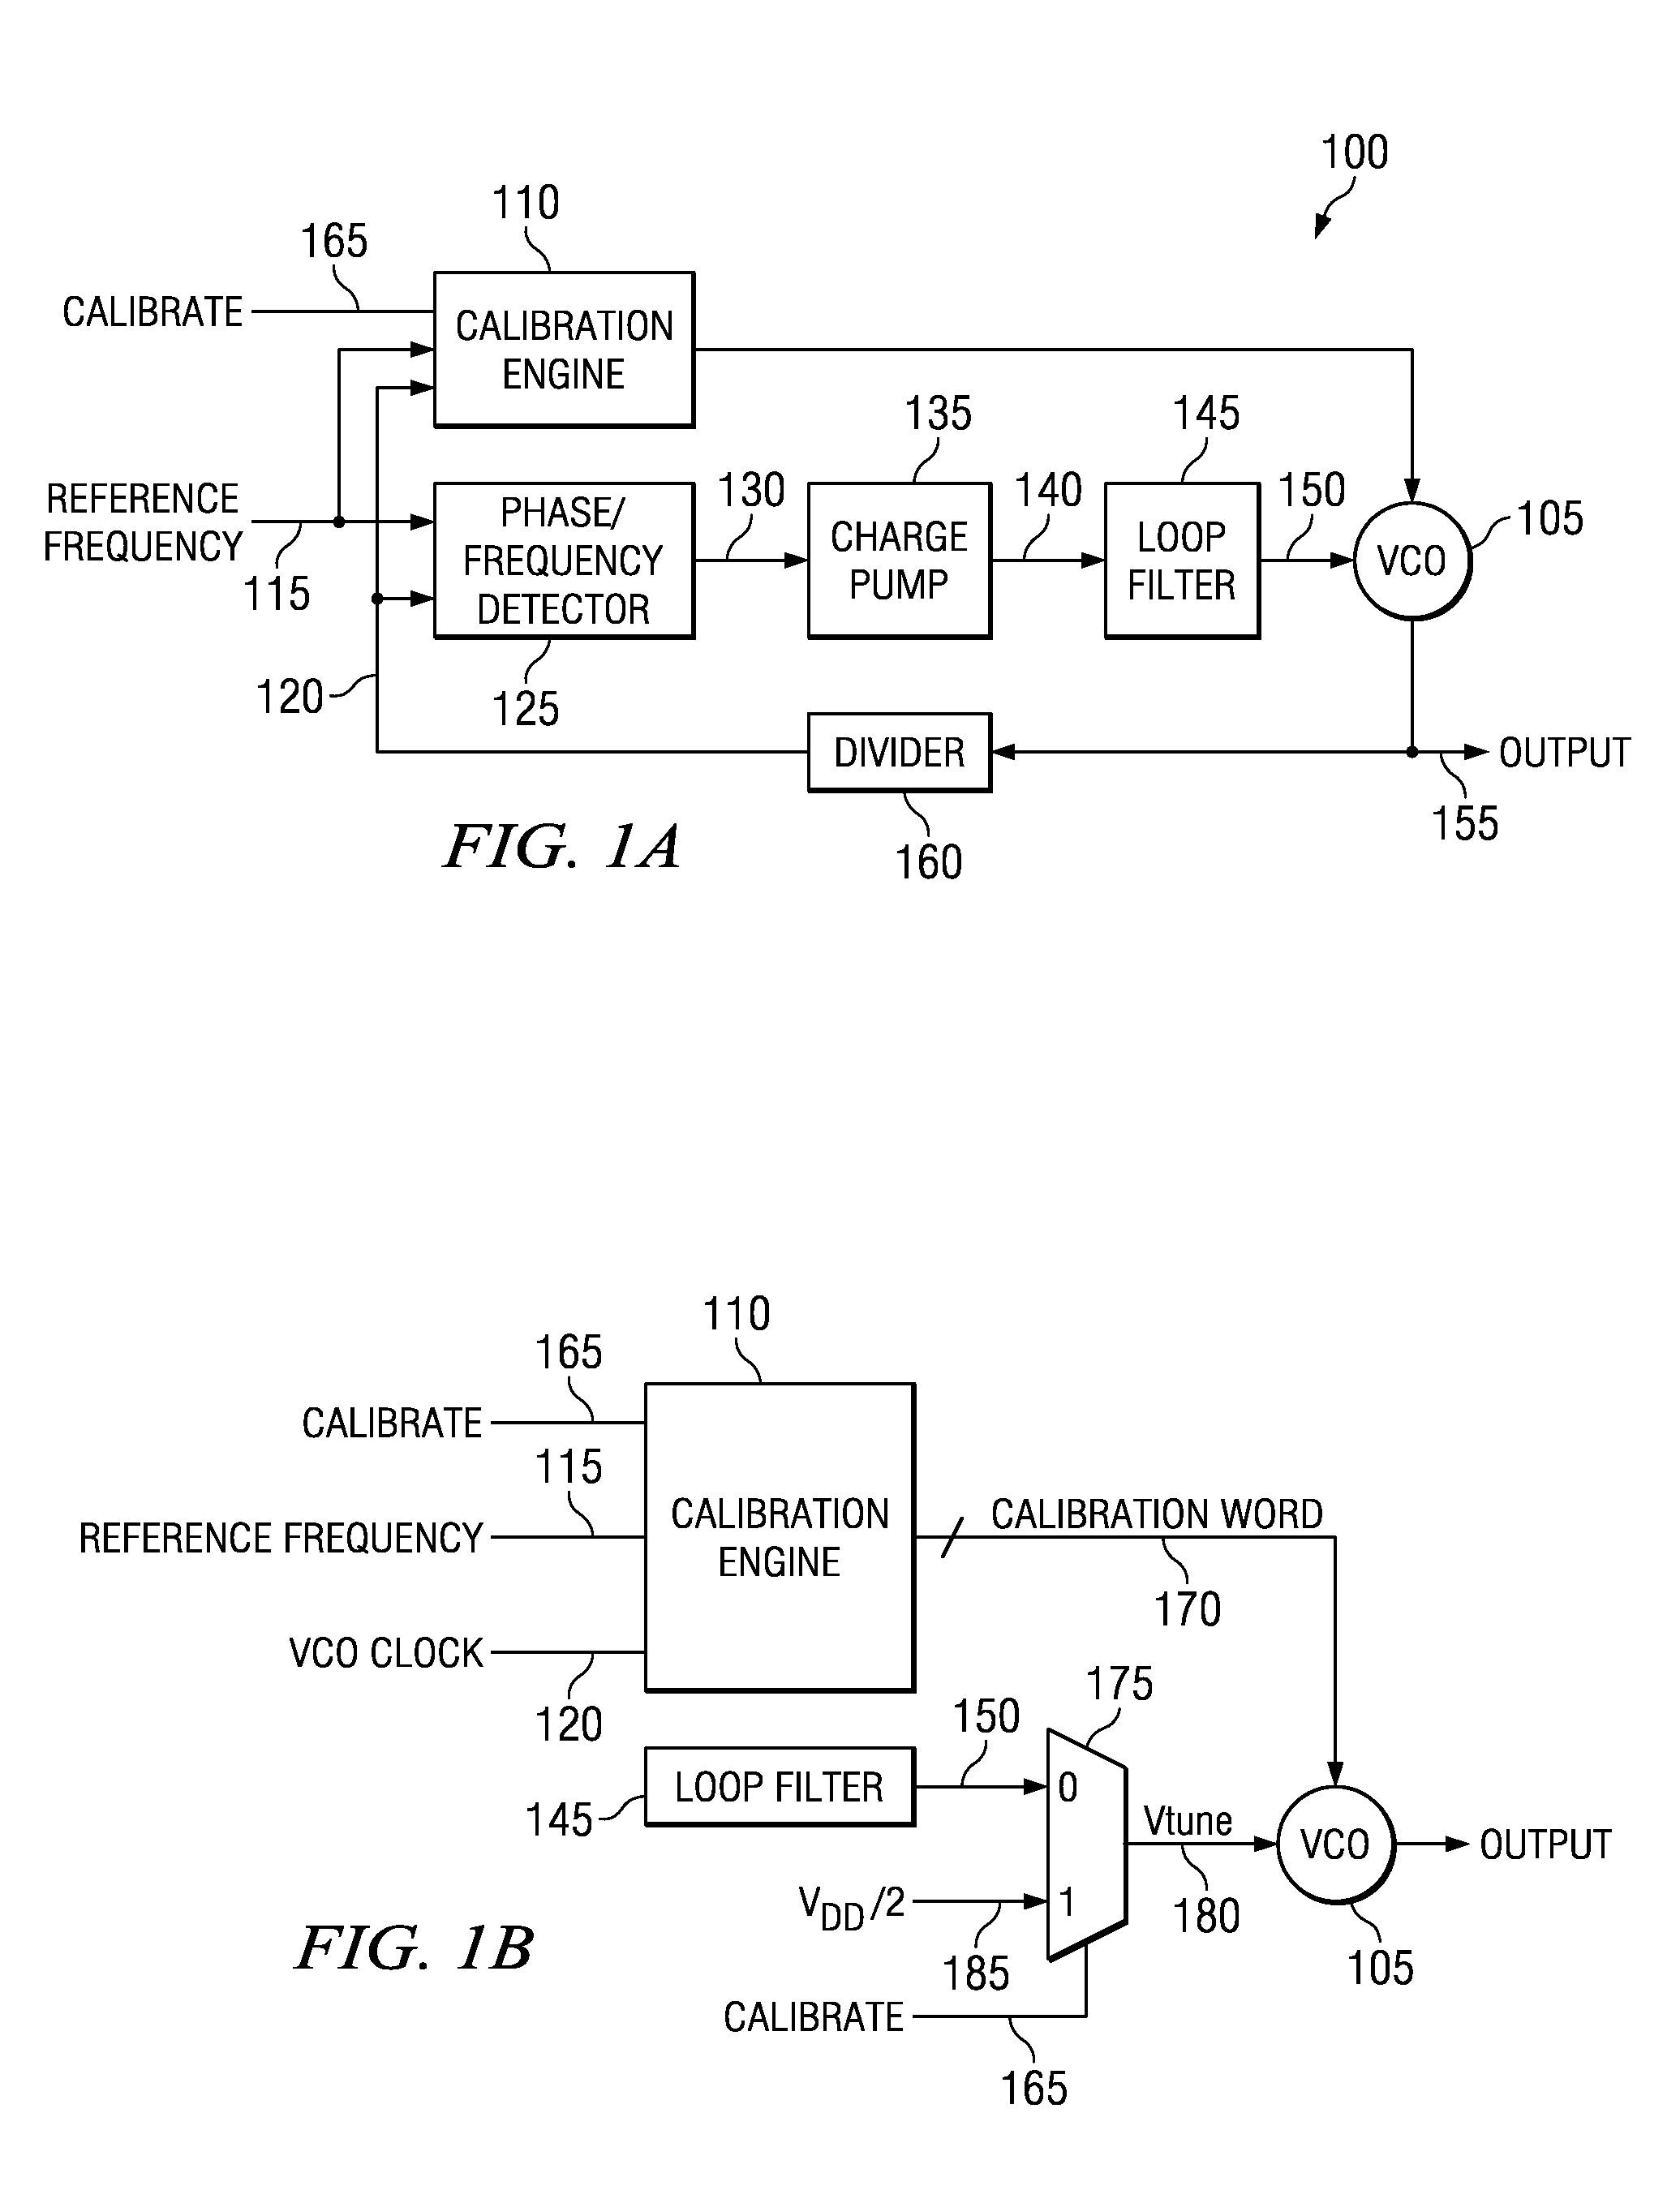 Systems and methods for voltage controlled oscillator calibration